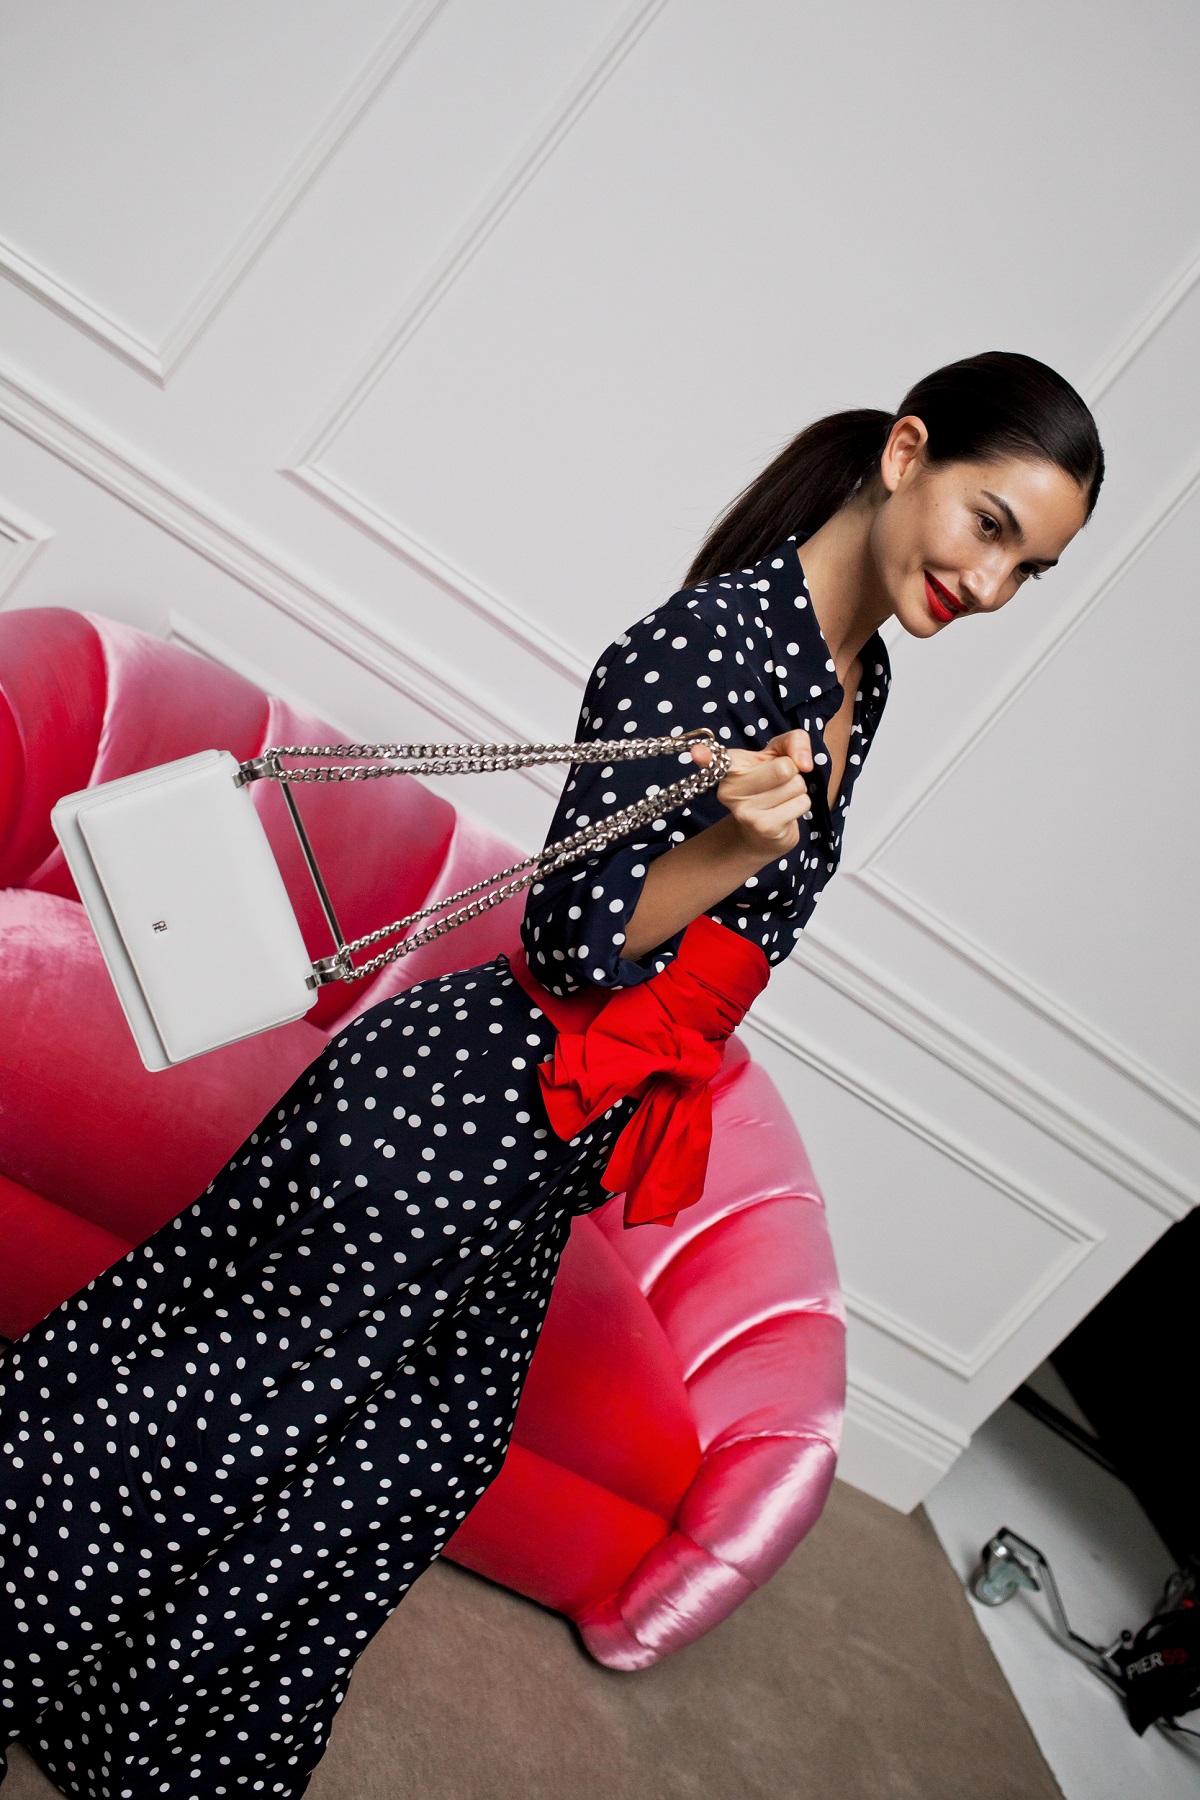 CH Carolina Herrera Introduces The Insignia Bag Collection-Pamper